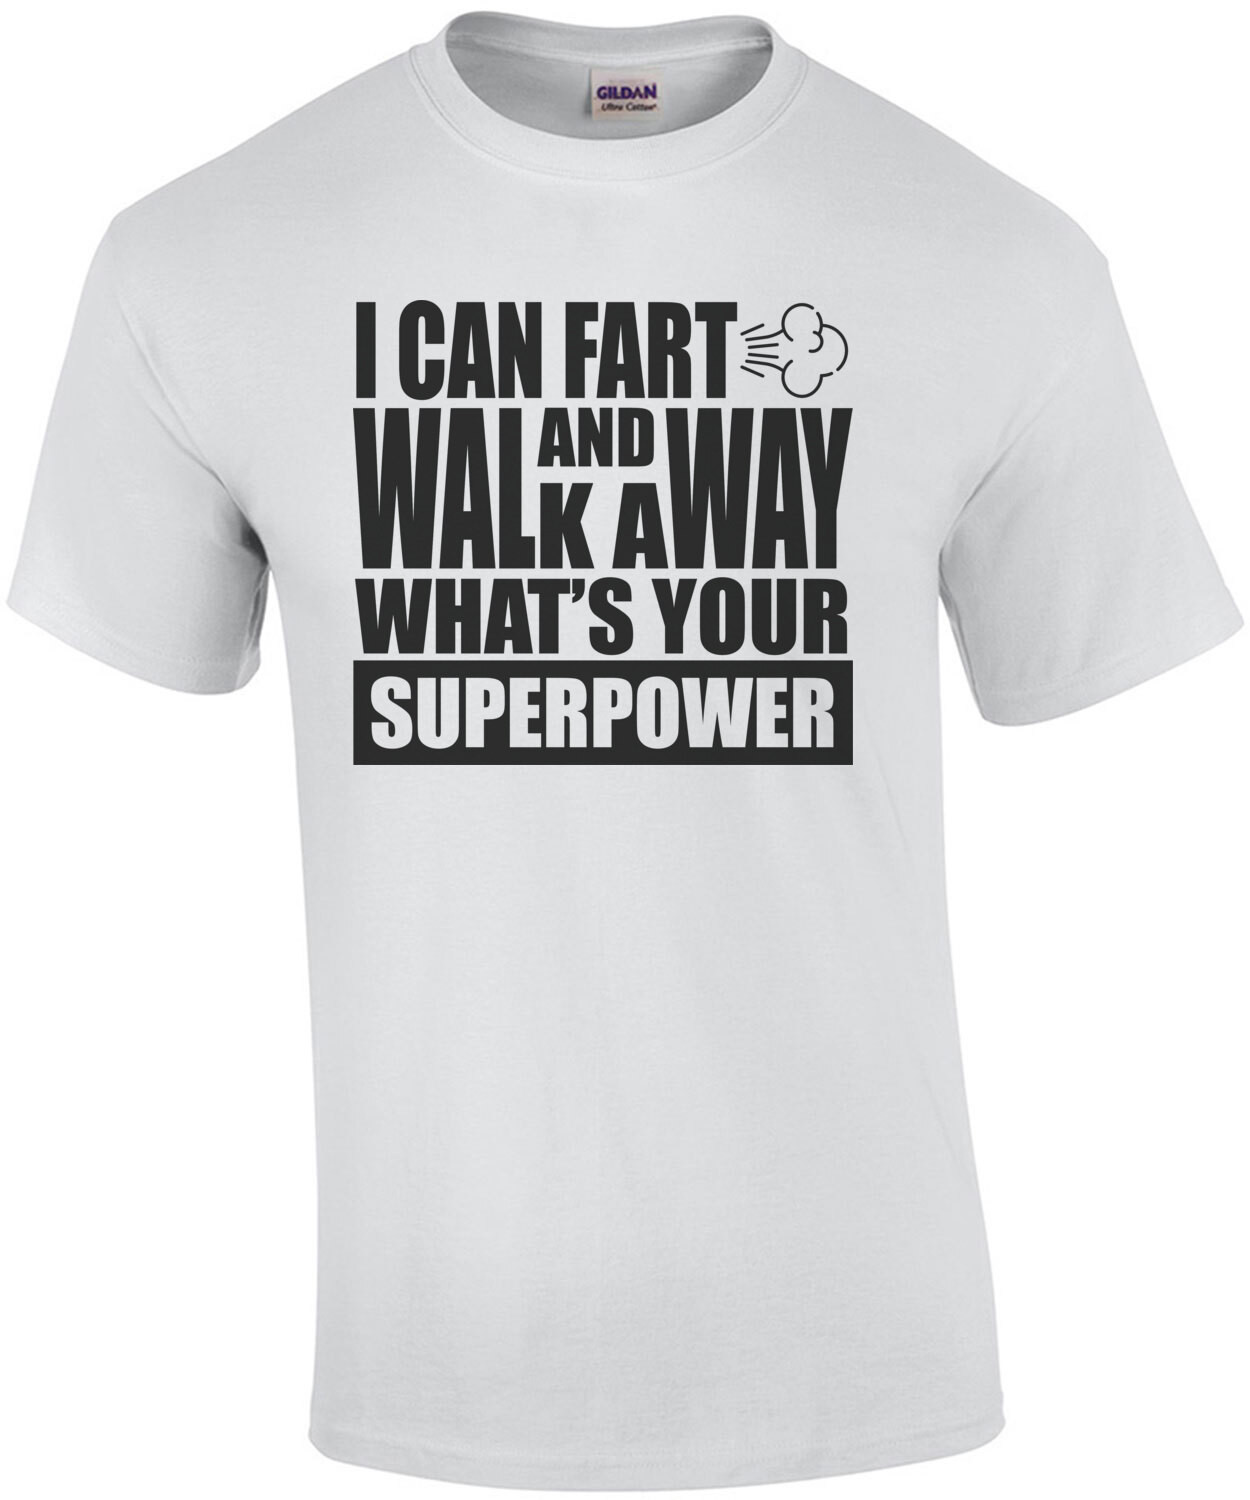 I can fart and walk away - what's your superpower - fart t-shirt